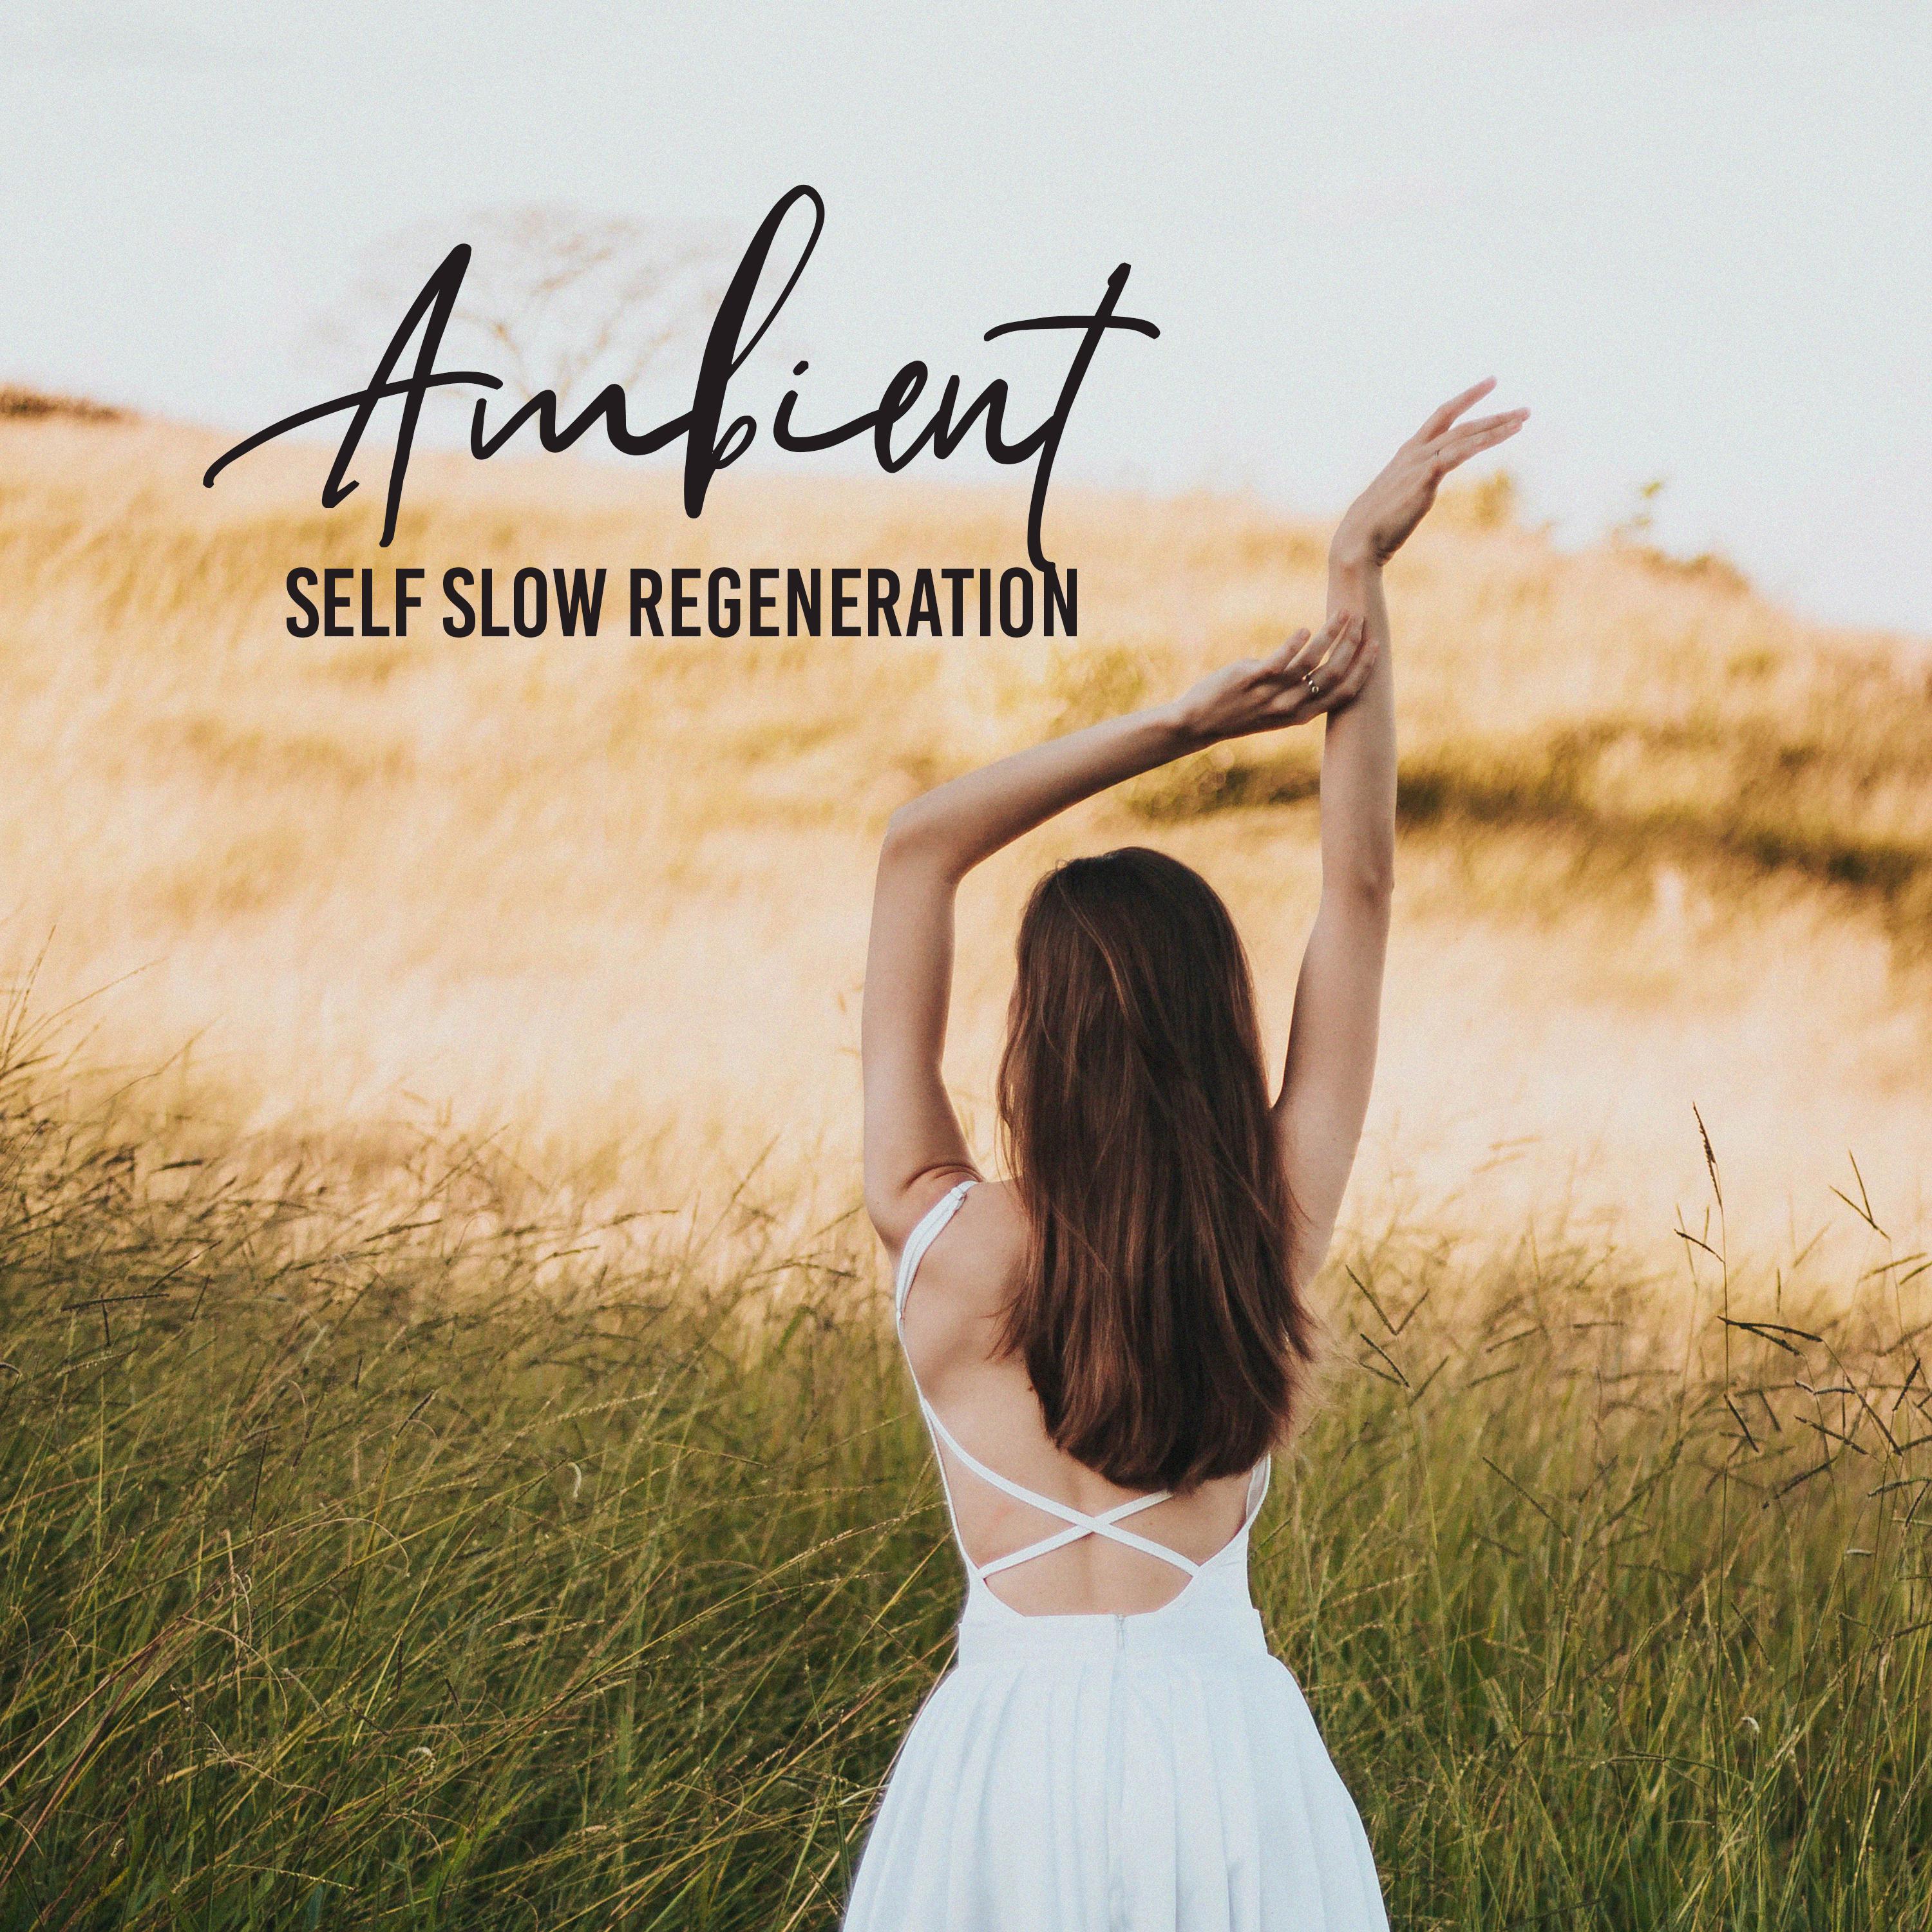 Ambient Self Slow Regeneration: 2019 New Age Deep Music Compilation for Total Calming Down, Rest & Relax, Vital Energy Increase, Body & Soul Healing